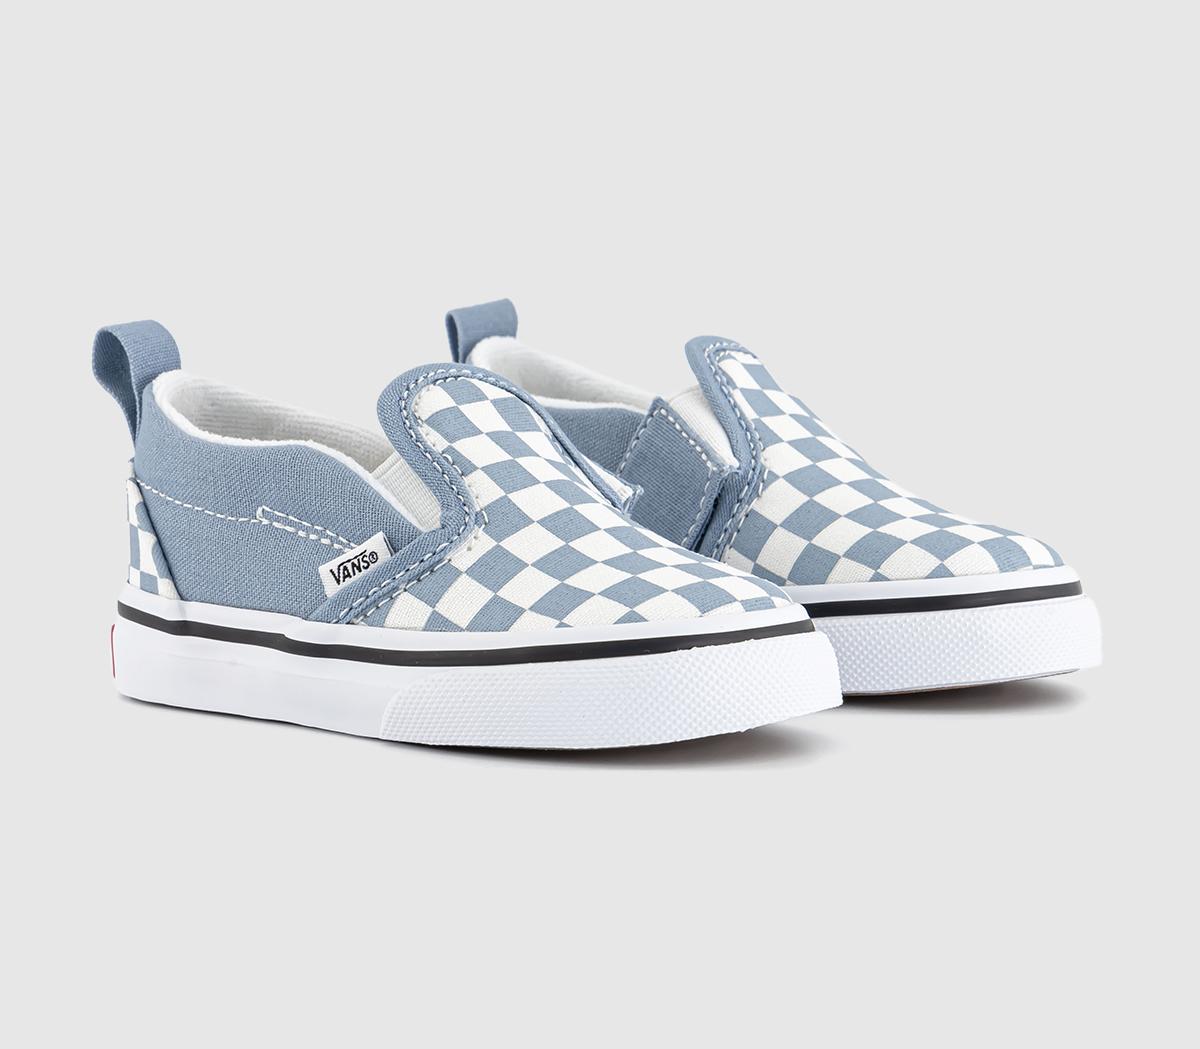 Vans Kids Classic Slip On Toddler Trainers Color Theory Checkerboard Dusty Blue, 9infant